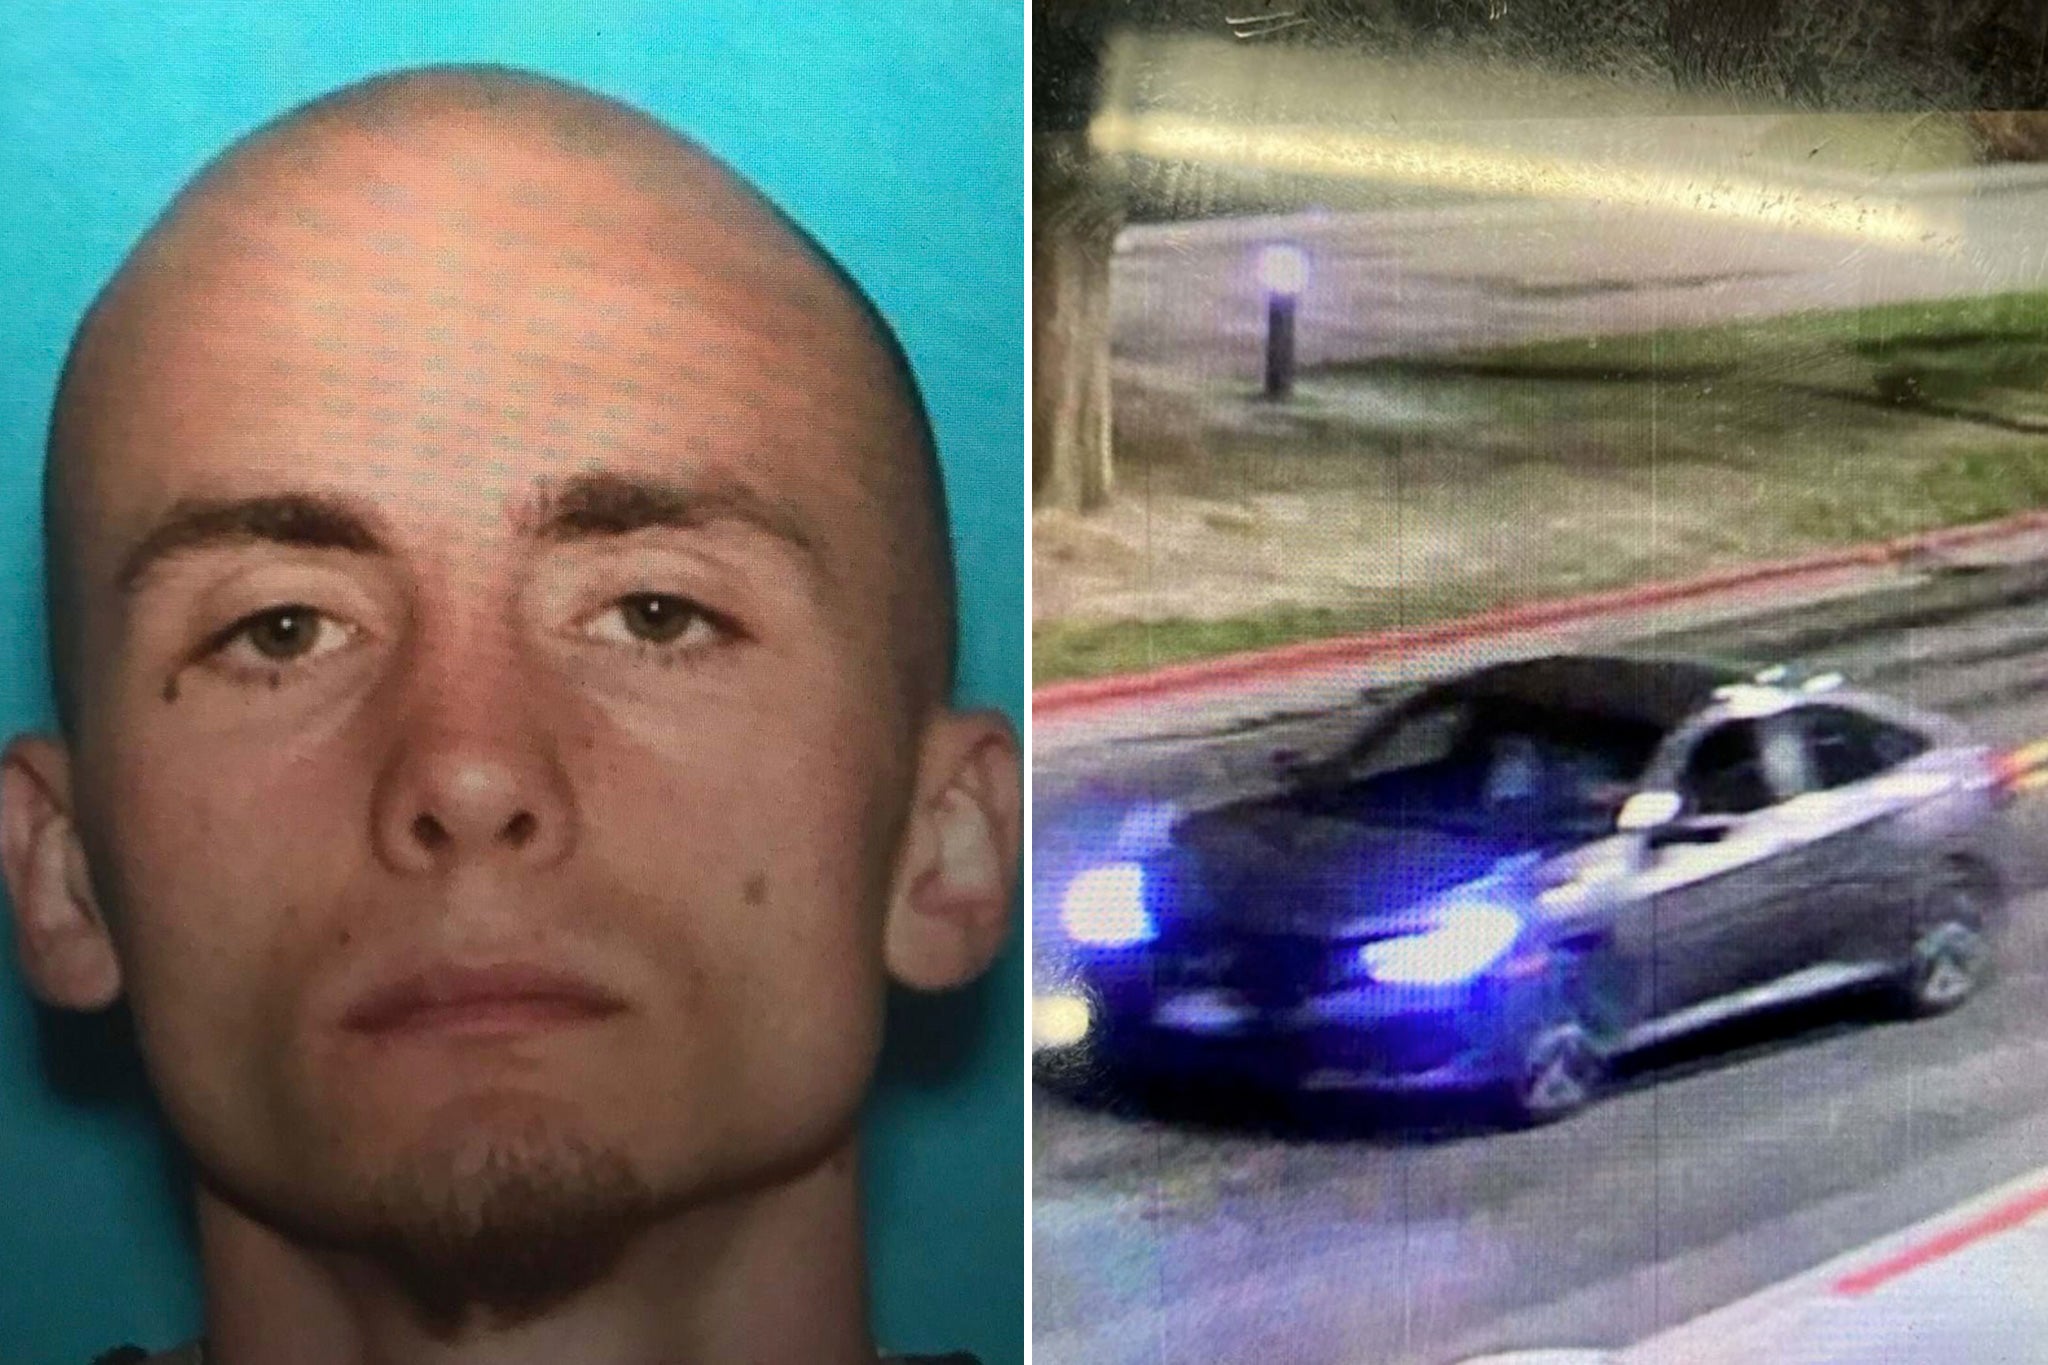 Skylar Meade escaped after an accomplice broke him out of a hospital in Idaho at dead of night. Three correctional officers were shot and wounded, one by a police officer responding to the emergency call